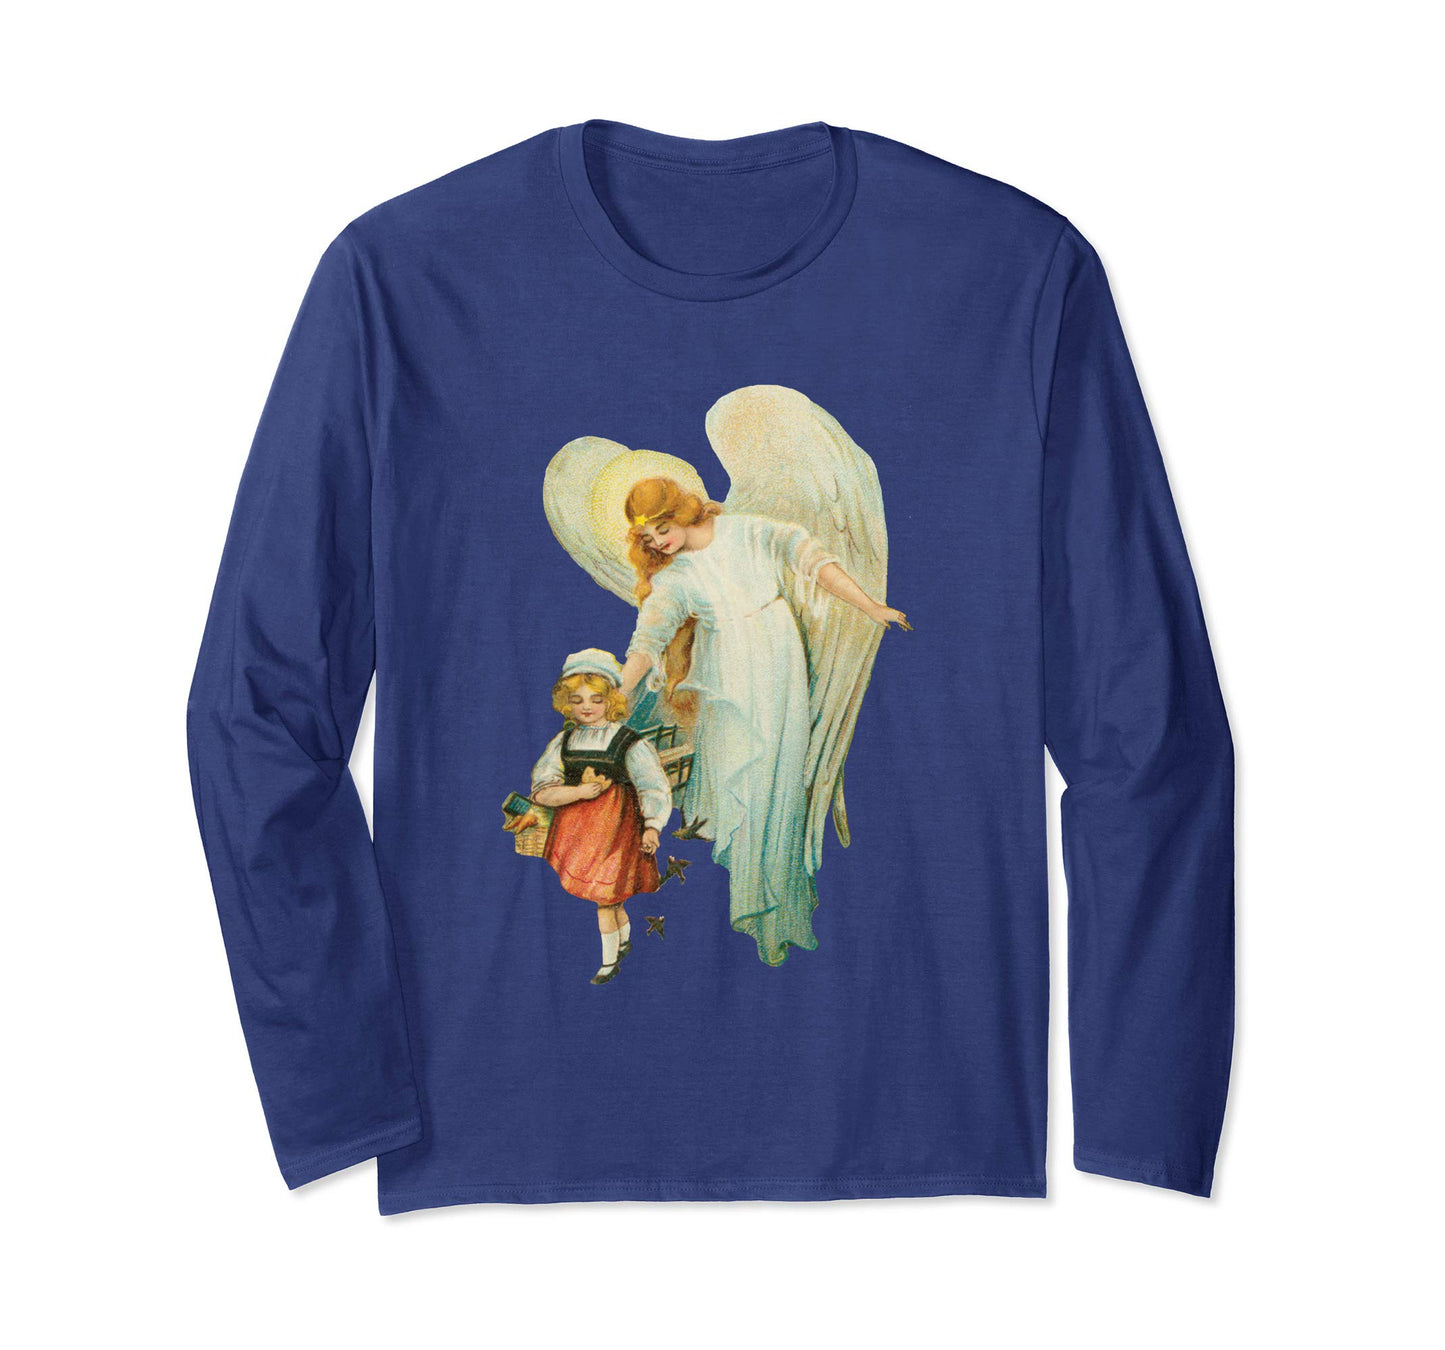 Unisex Long Sleeve T-Shirt Guardian Angel with Girl Navy